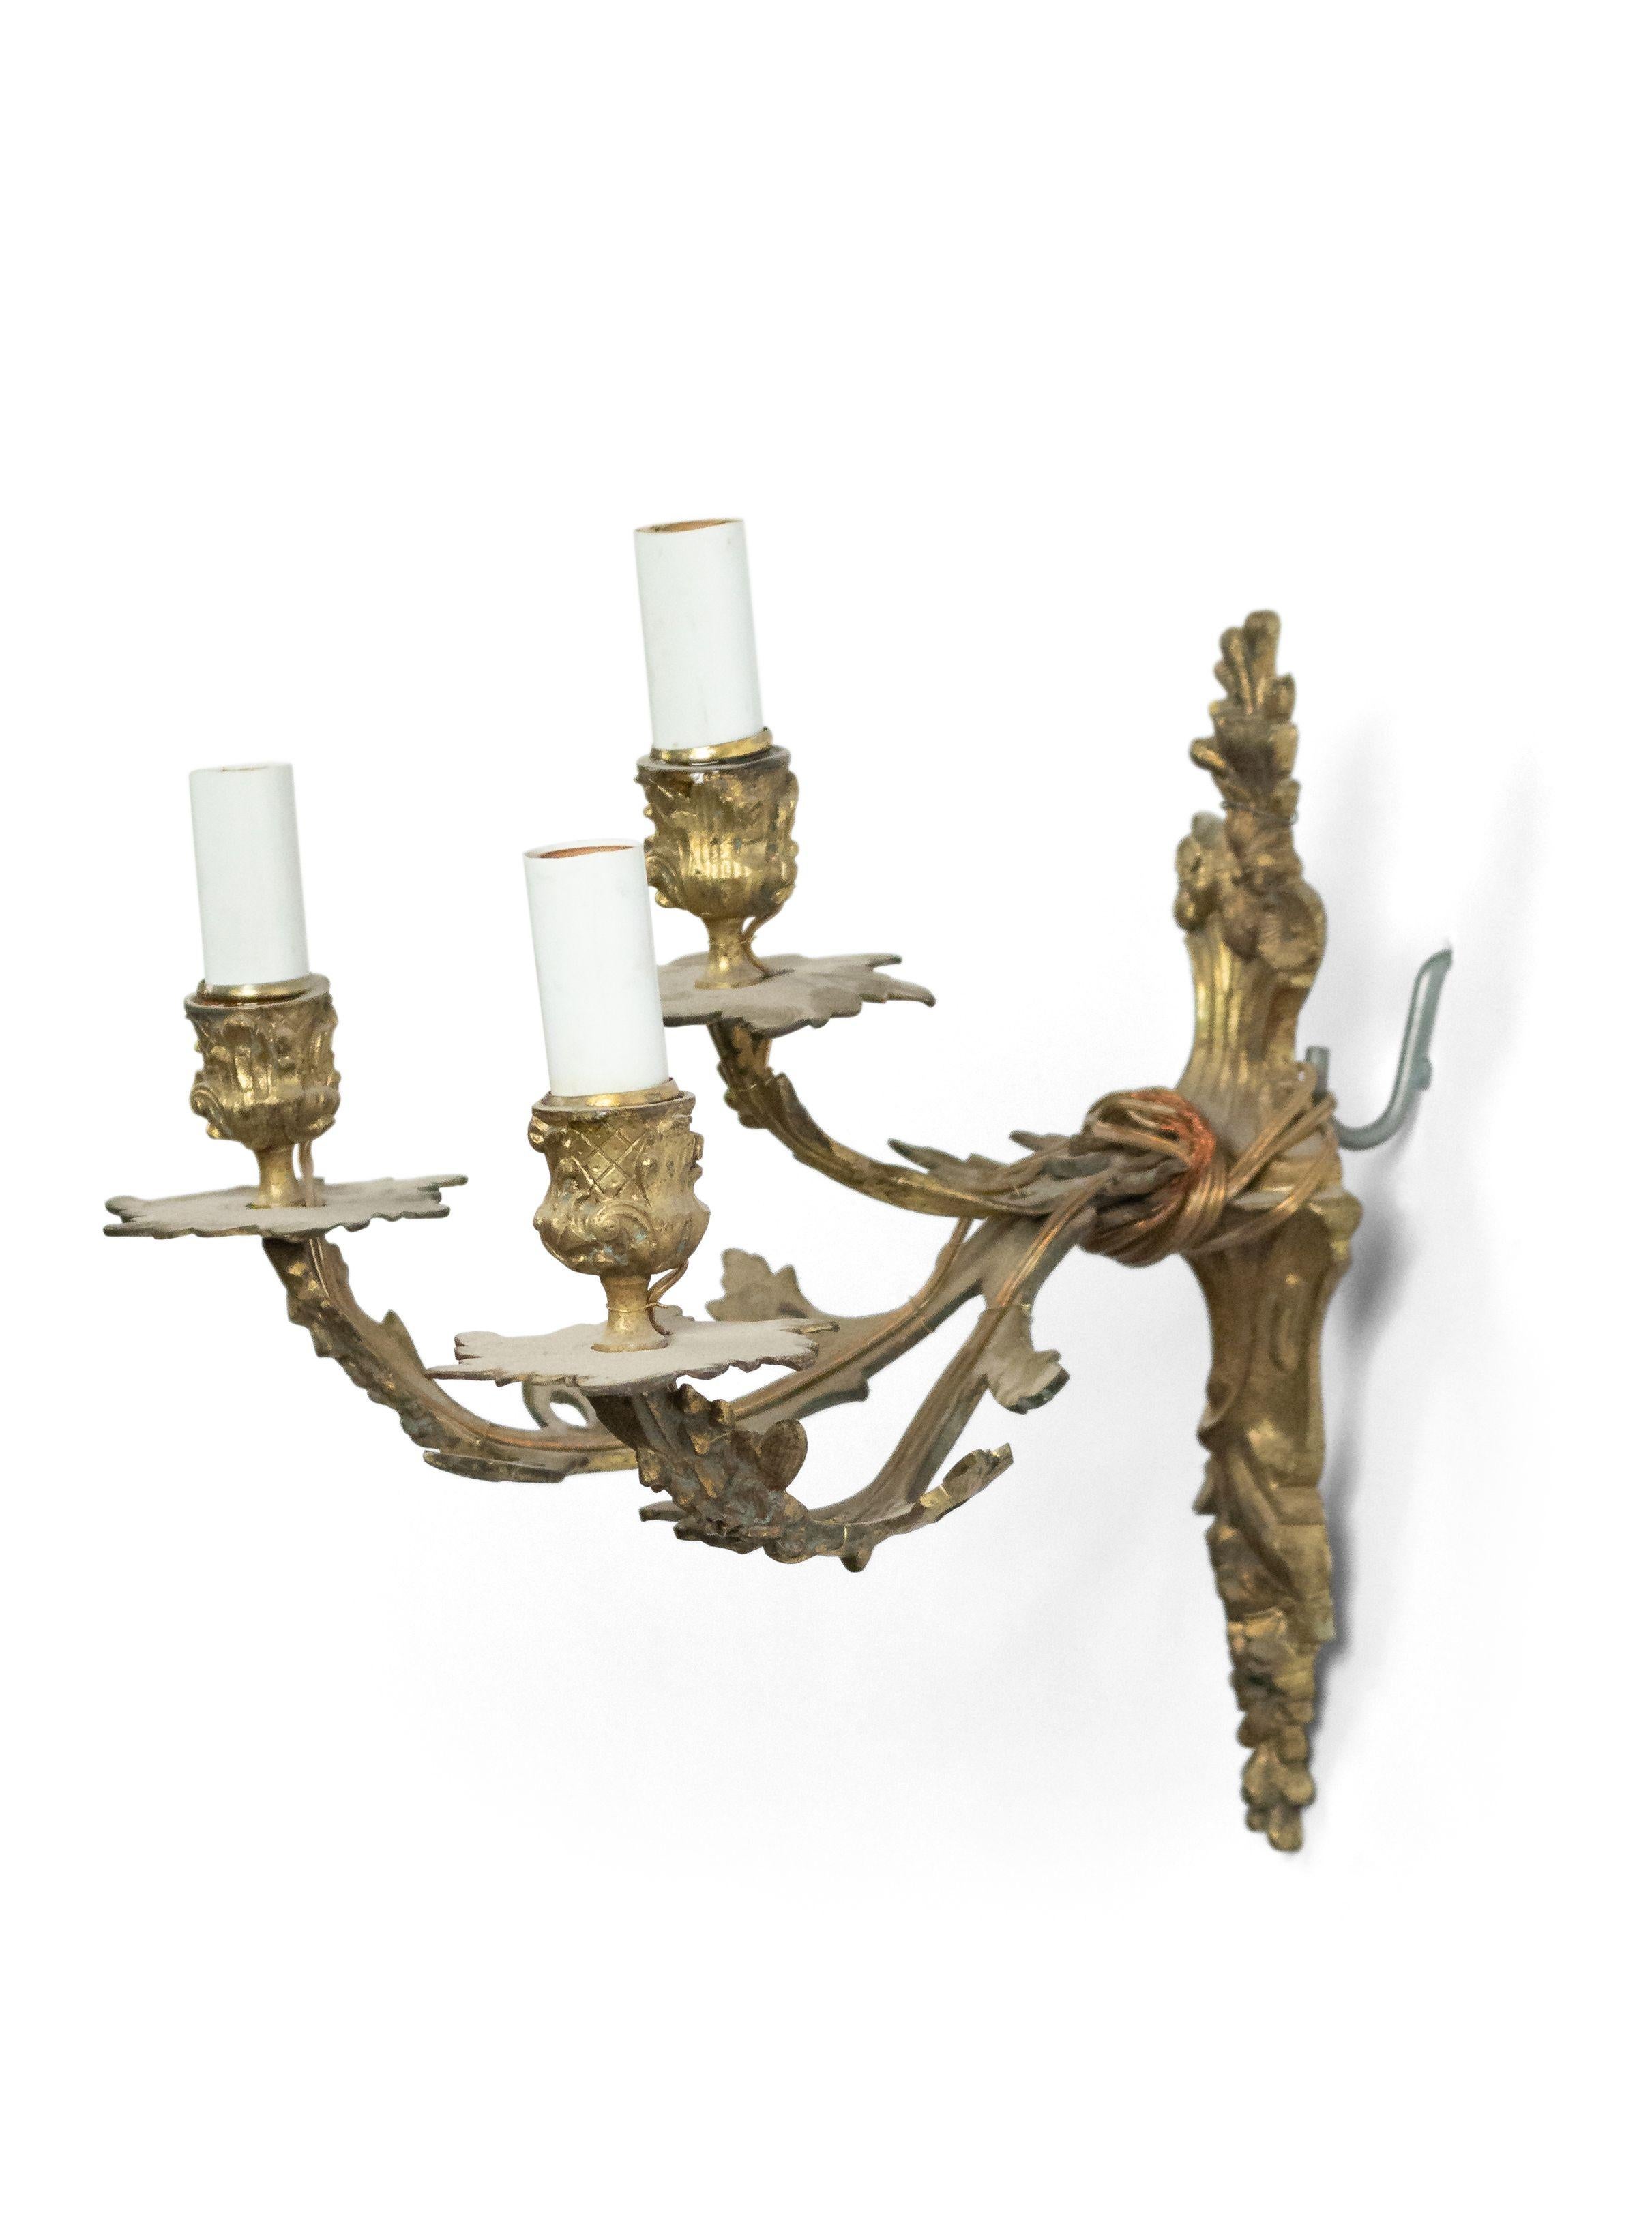 Pair of French Louis XVI style 19th-20th century bronze dore 2-tier 3-arm wall sconces with floral design.